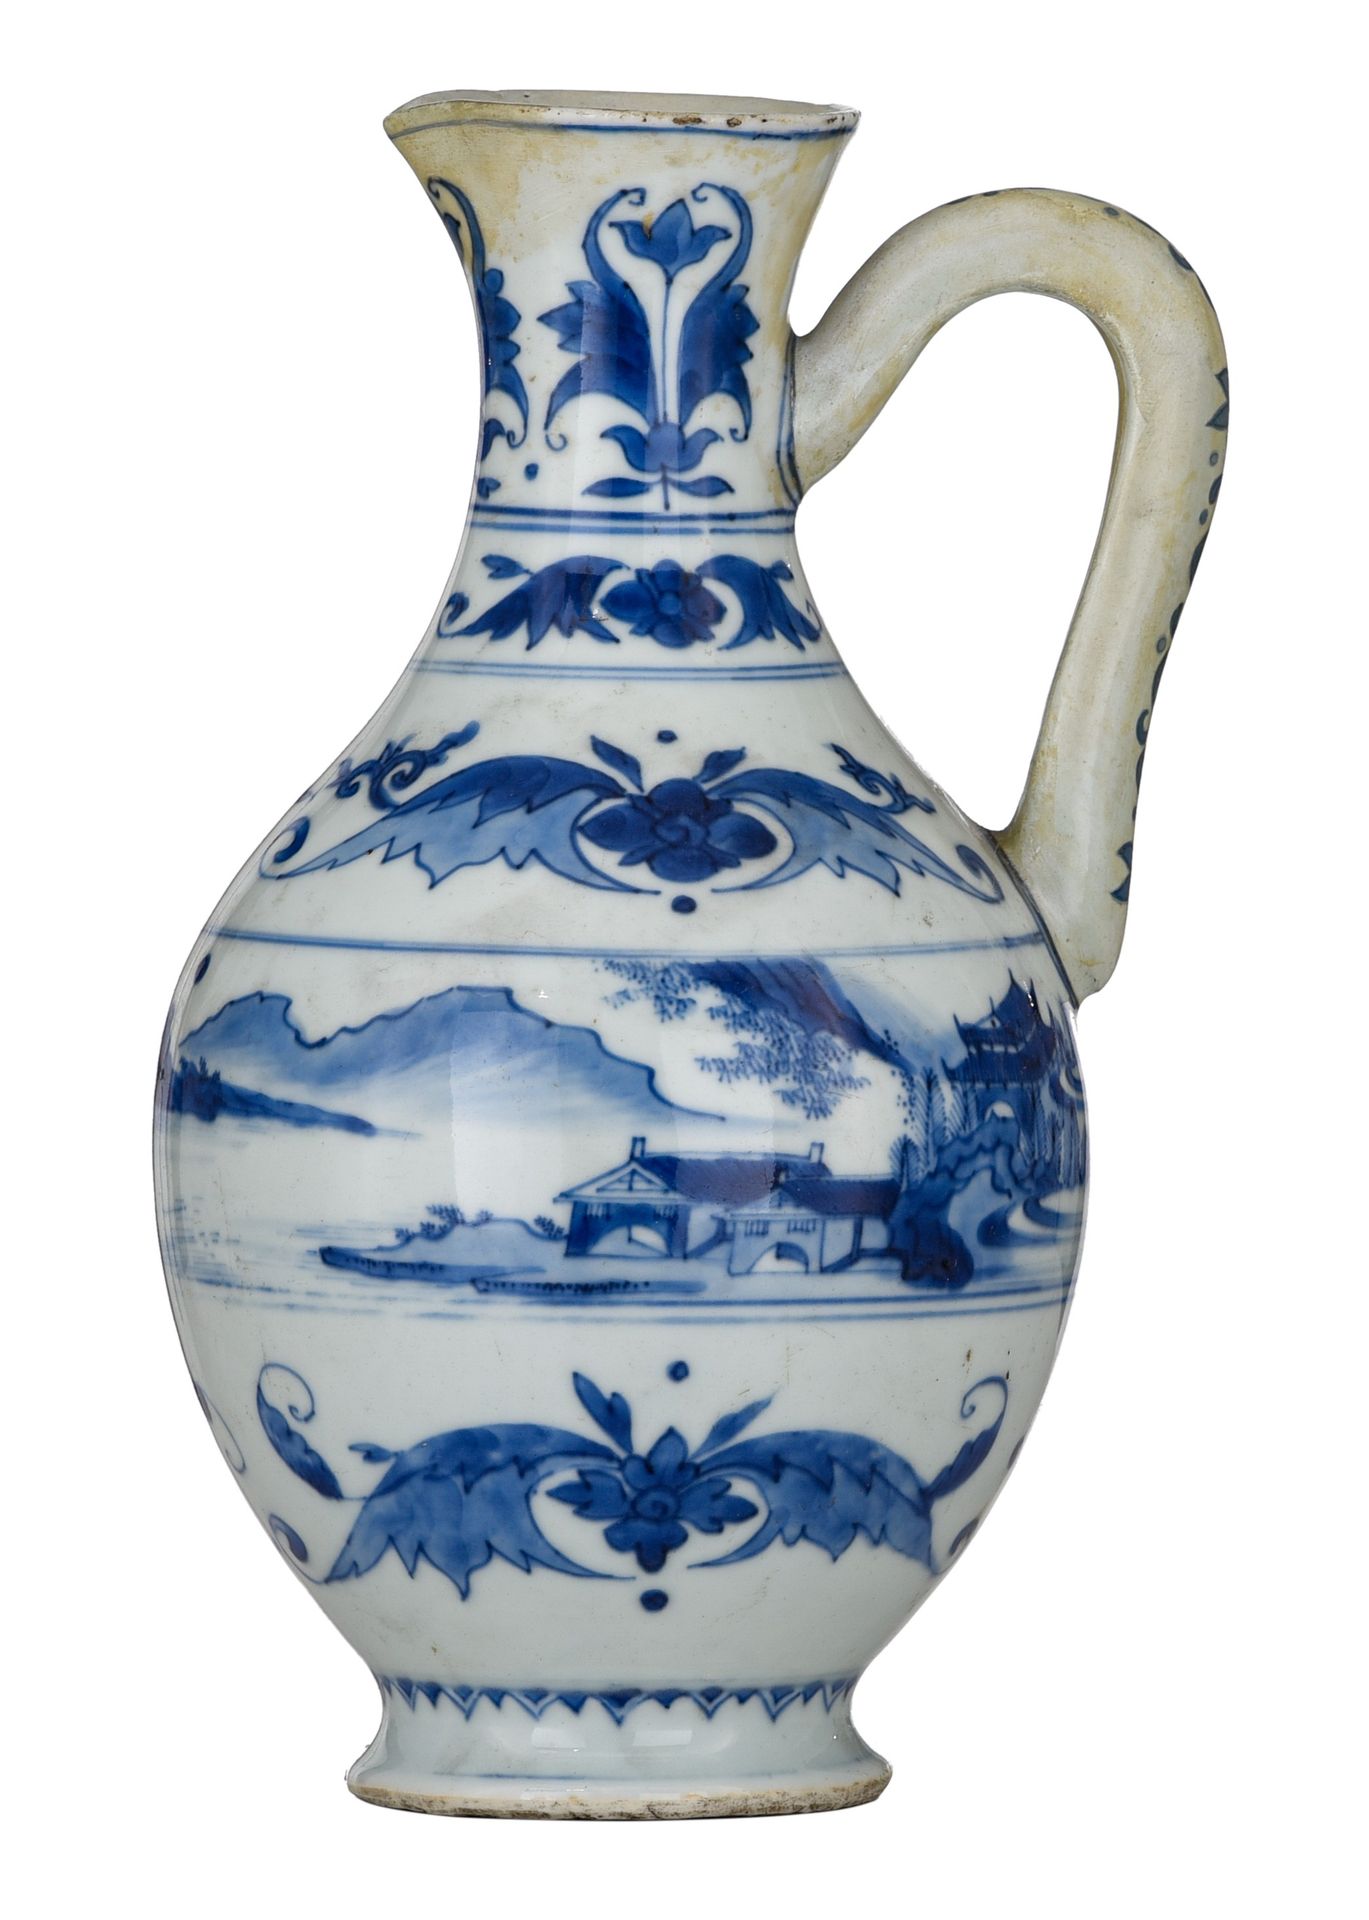 A Chinese blue and white jug, late 17thC/early 18thC, H 23,5 cm 中国青花壶，17世纪末/18世纪&hellip;